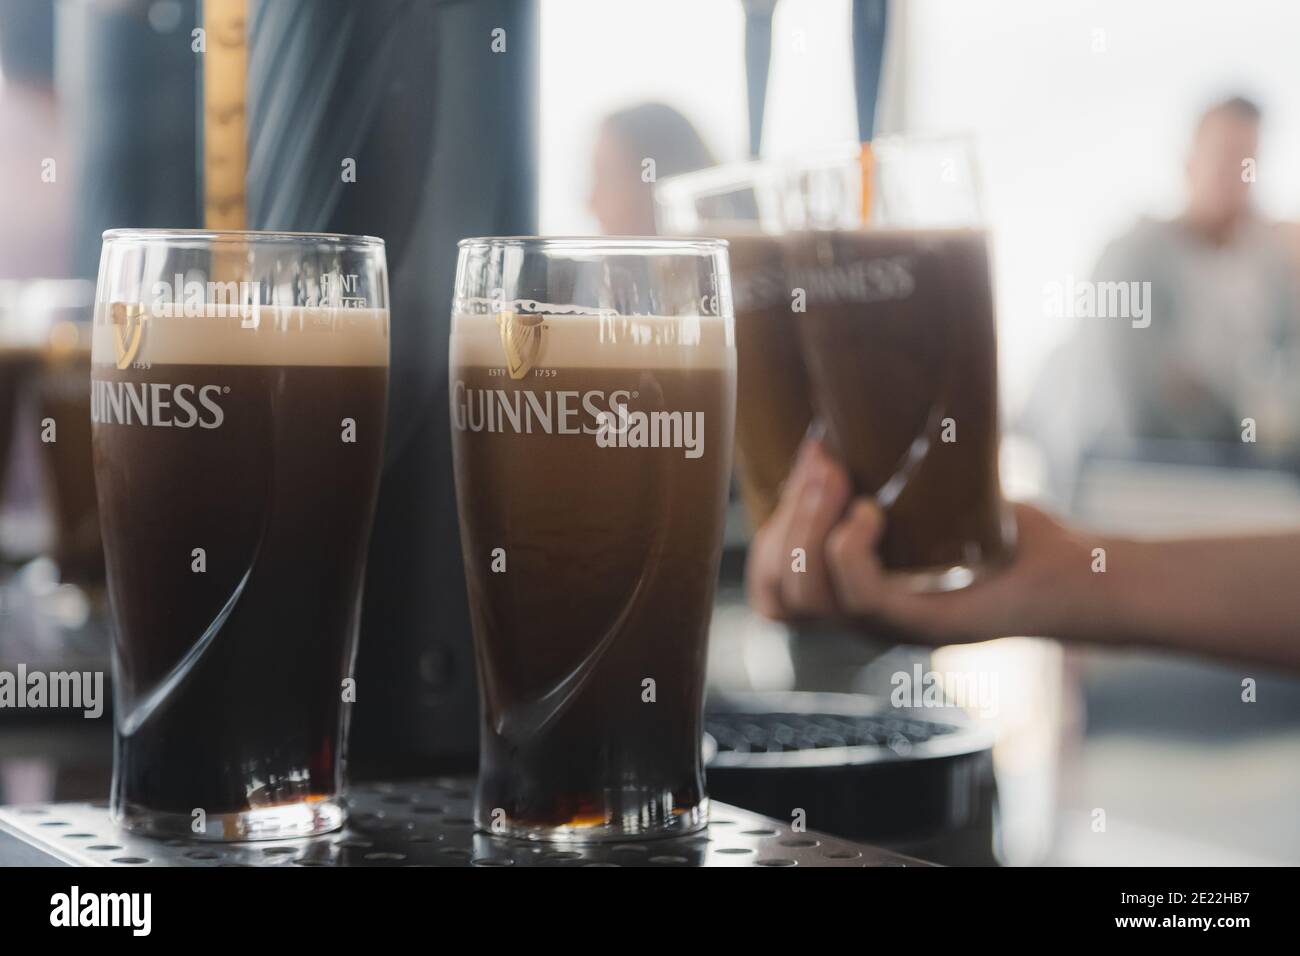 Dublin, Ireland - September 12 2016: Freshly poured pints of Guinness, the famous Irish dry stout at the Guinness Storehouse in Dublin, Ireland. Stock Photo